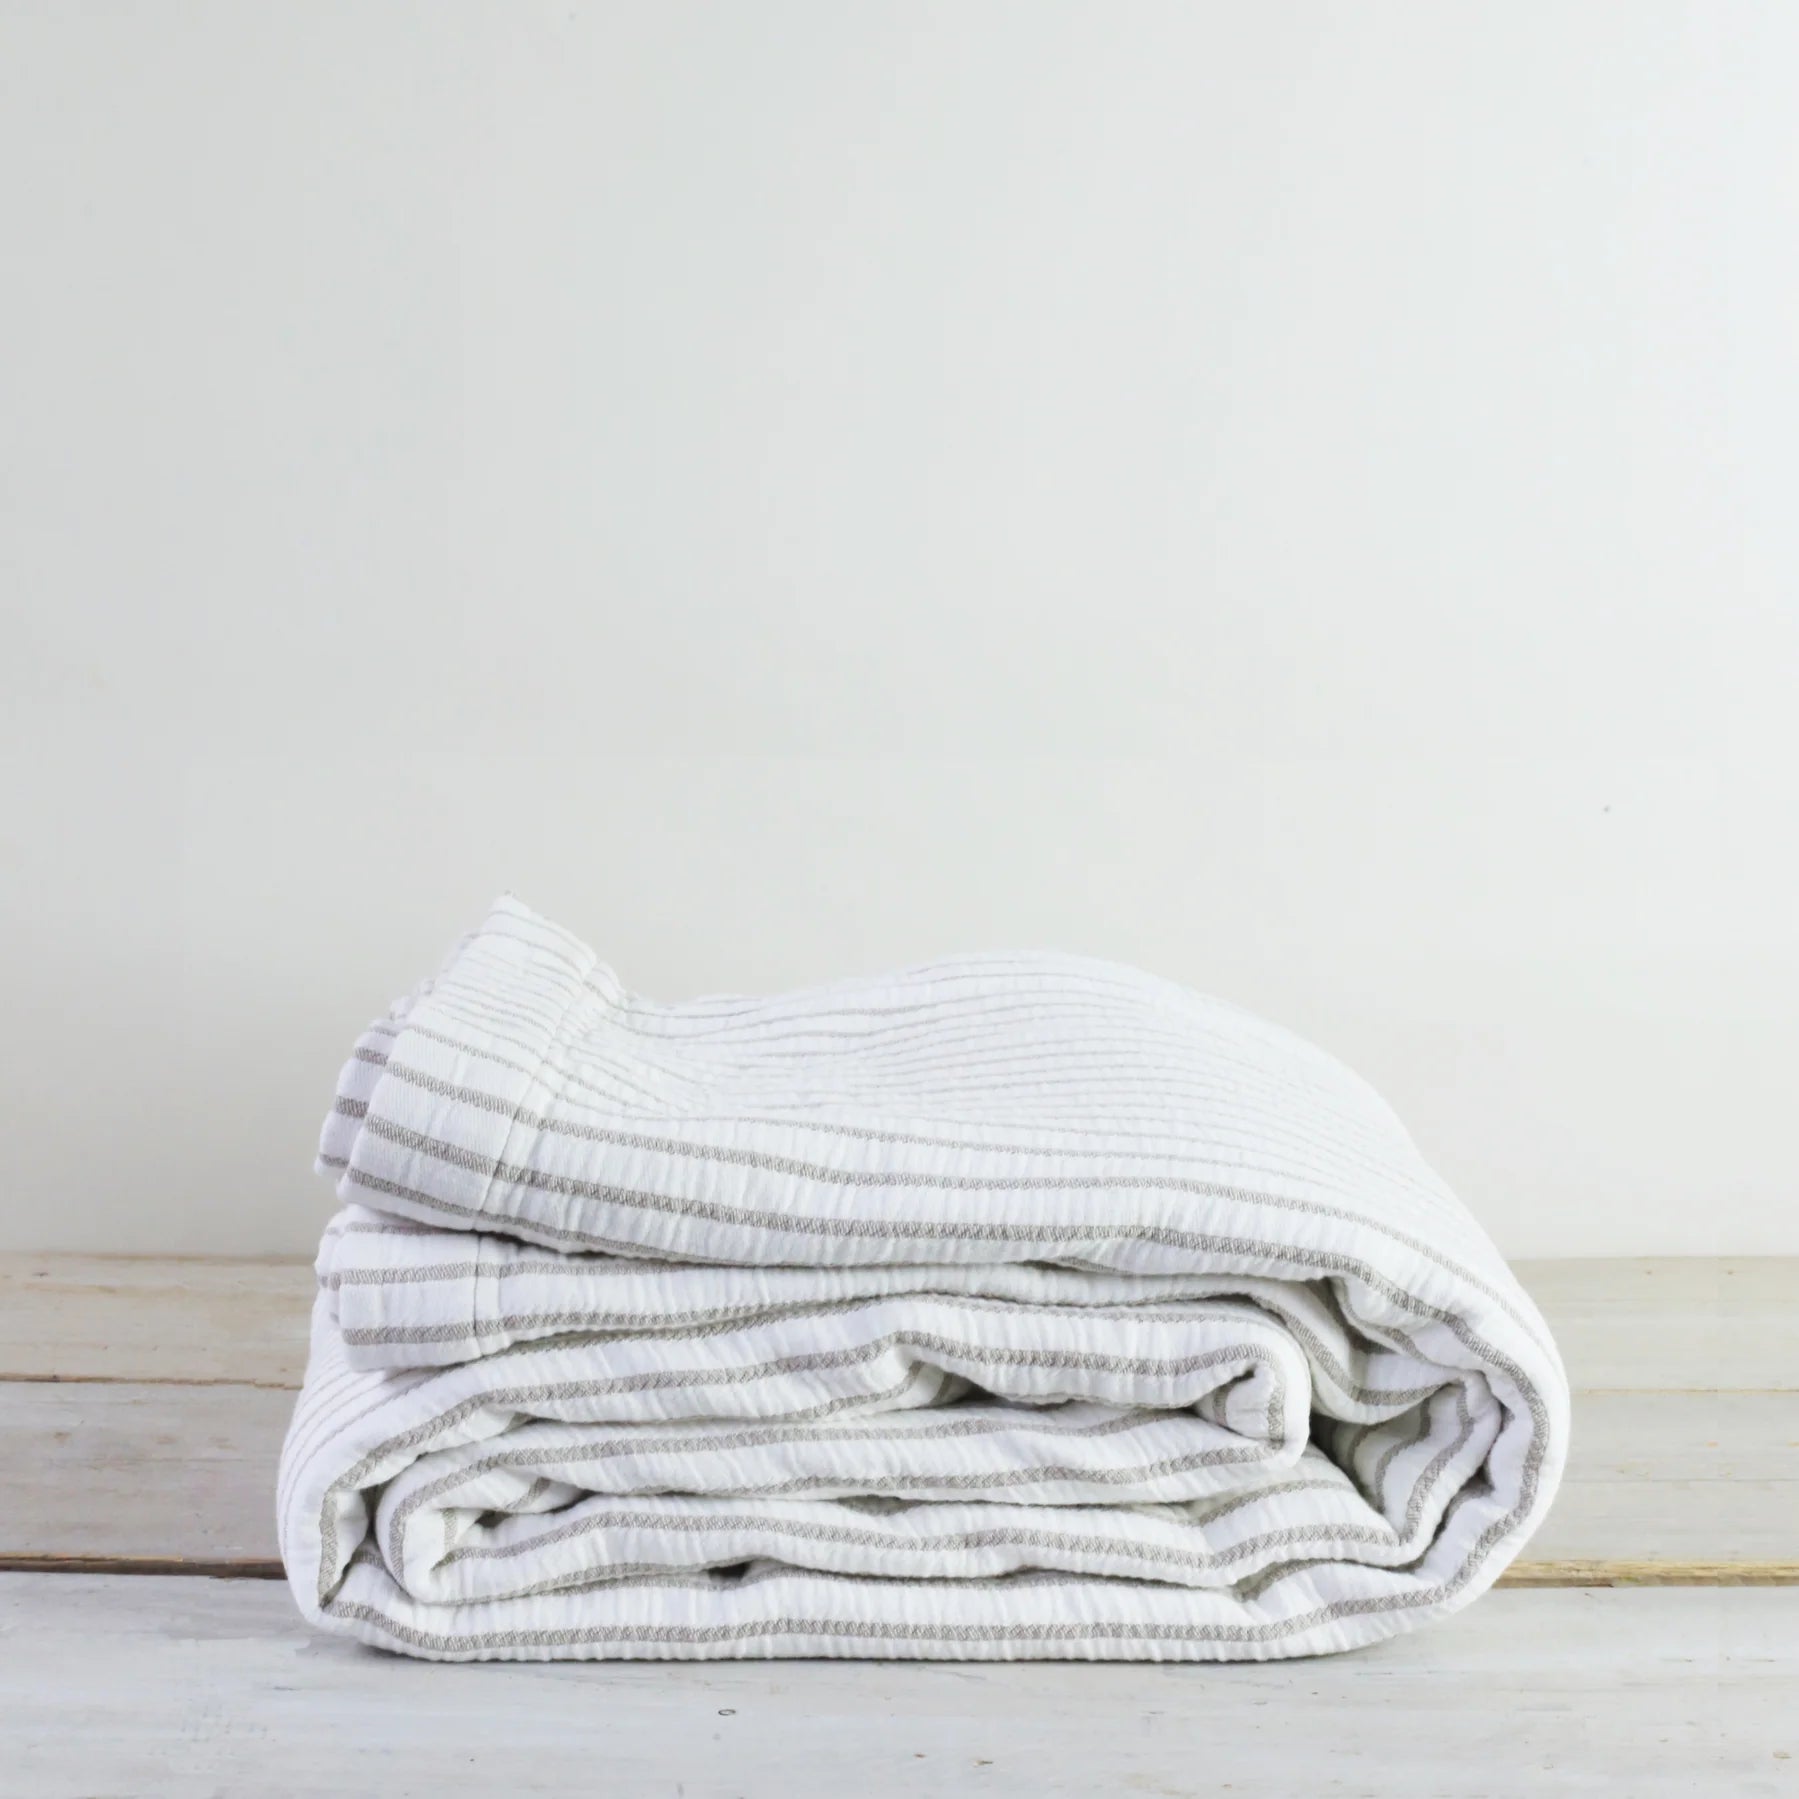 A folded Striped Cotton Throw Blanket on a rustic wooden floor.